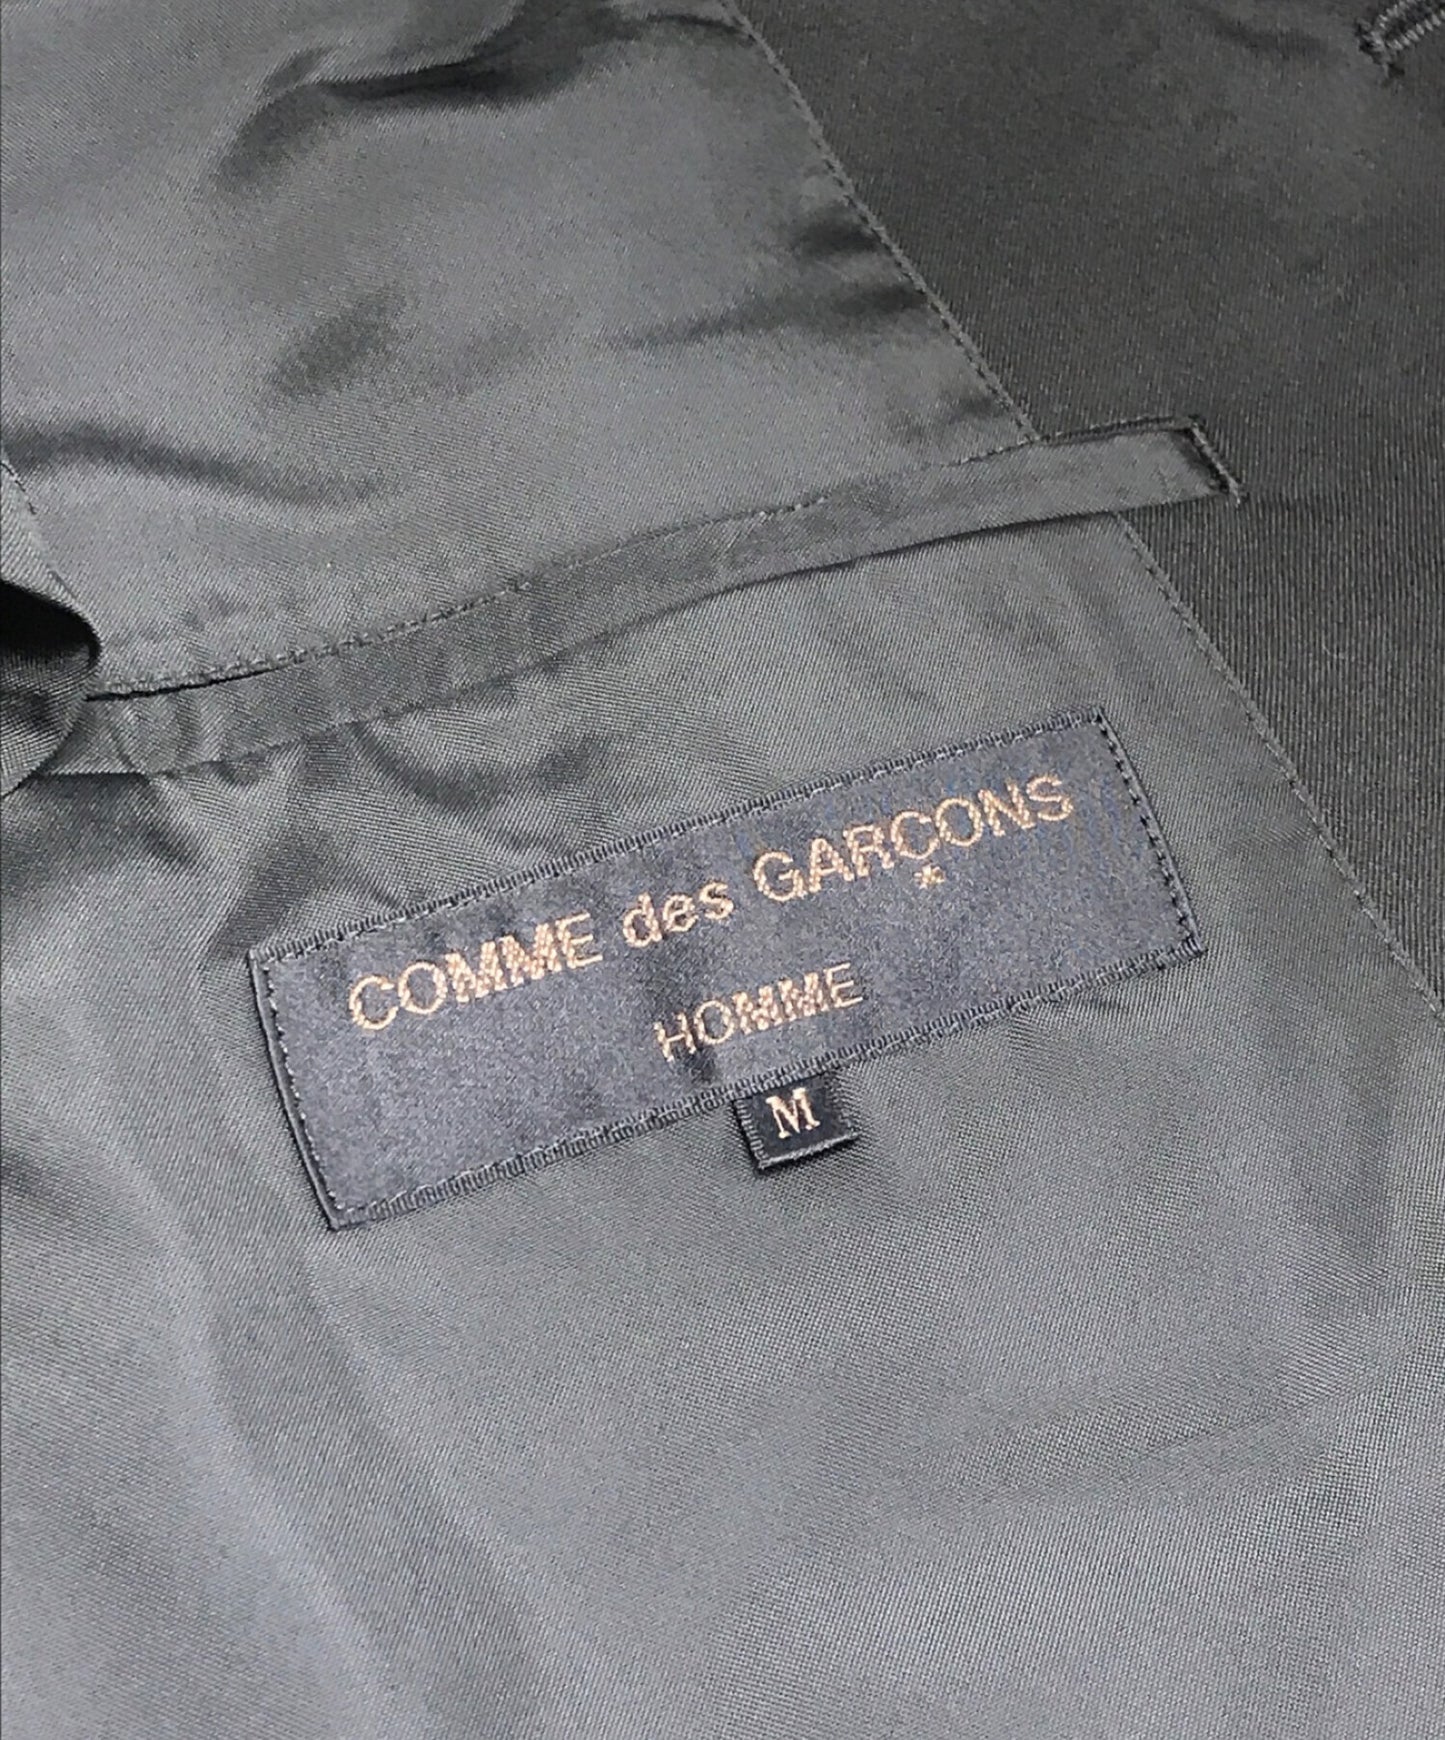 COMME DES GARCONS HOMME CLEAR COMBING TAILORED JECKET [OLD] HJ-10002M